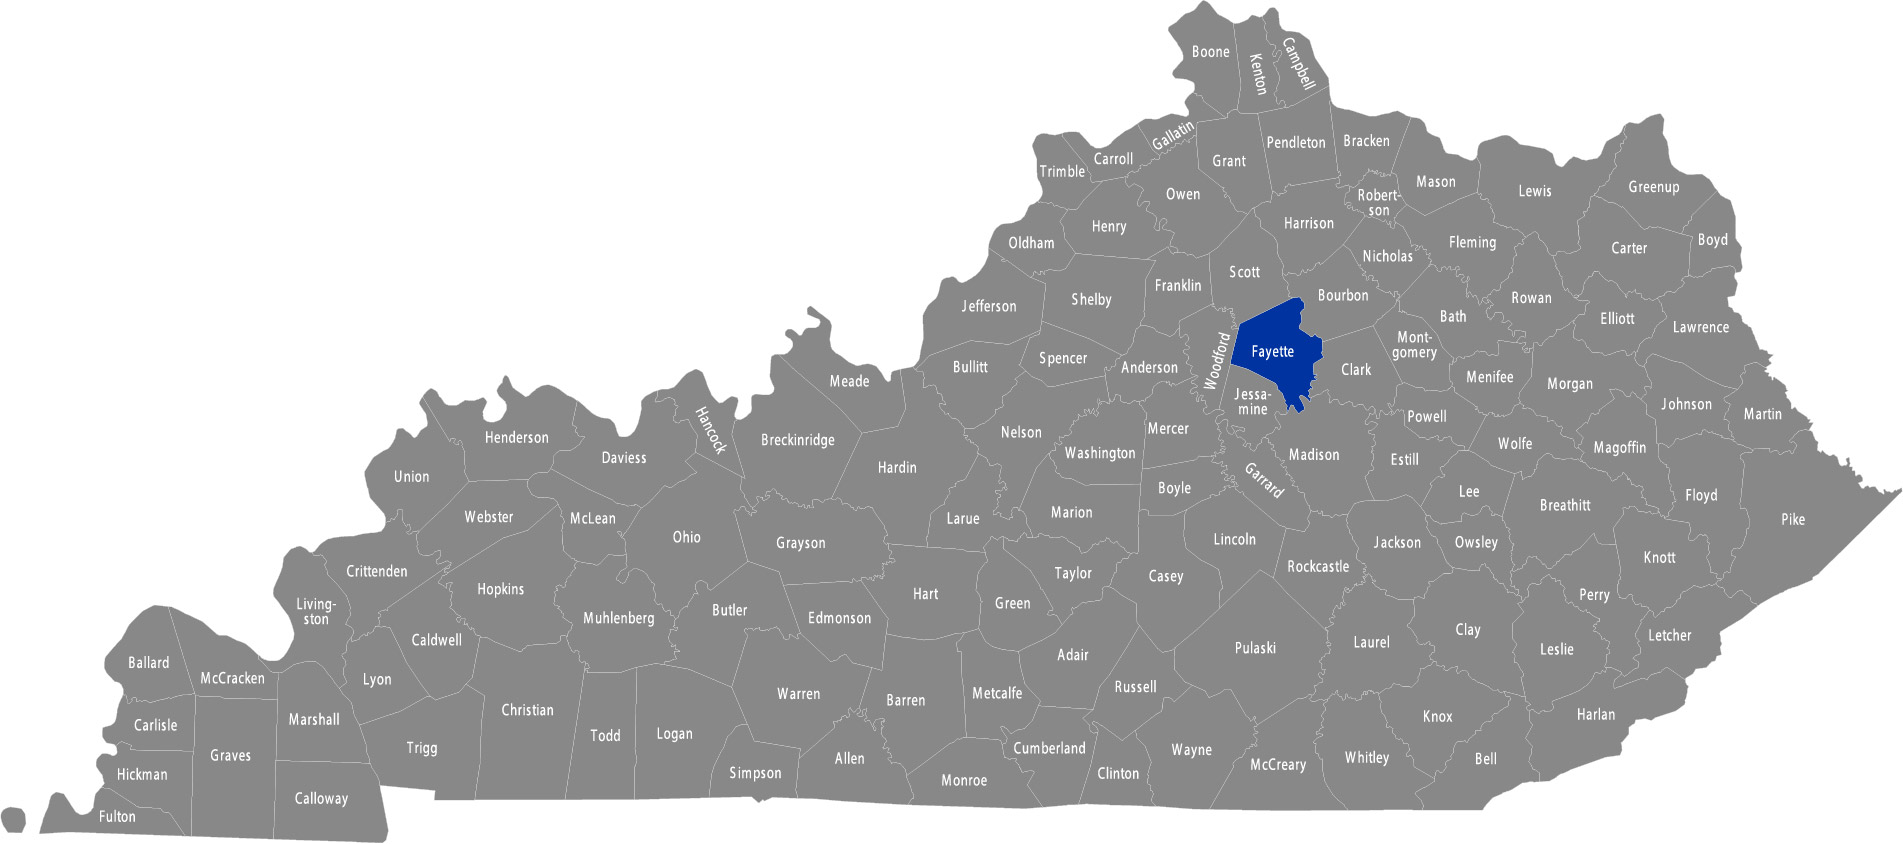 Kentucky map with fayette county highlighted in blue